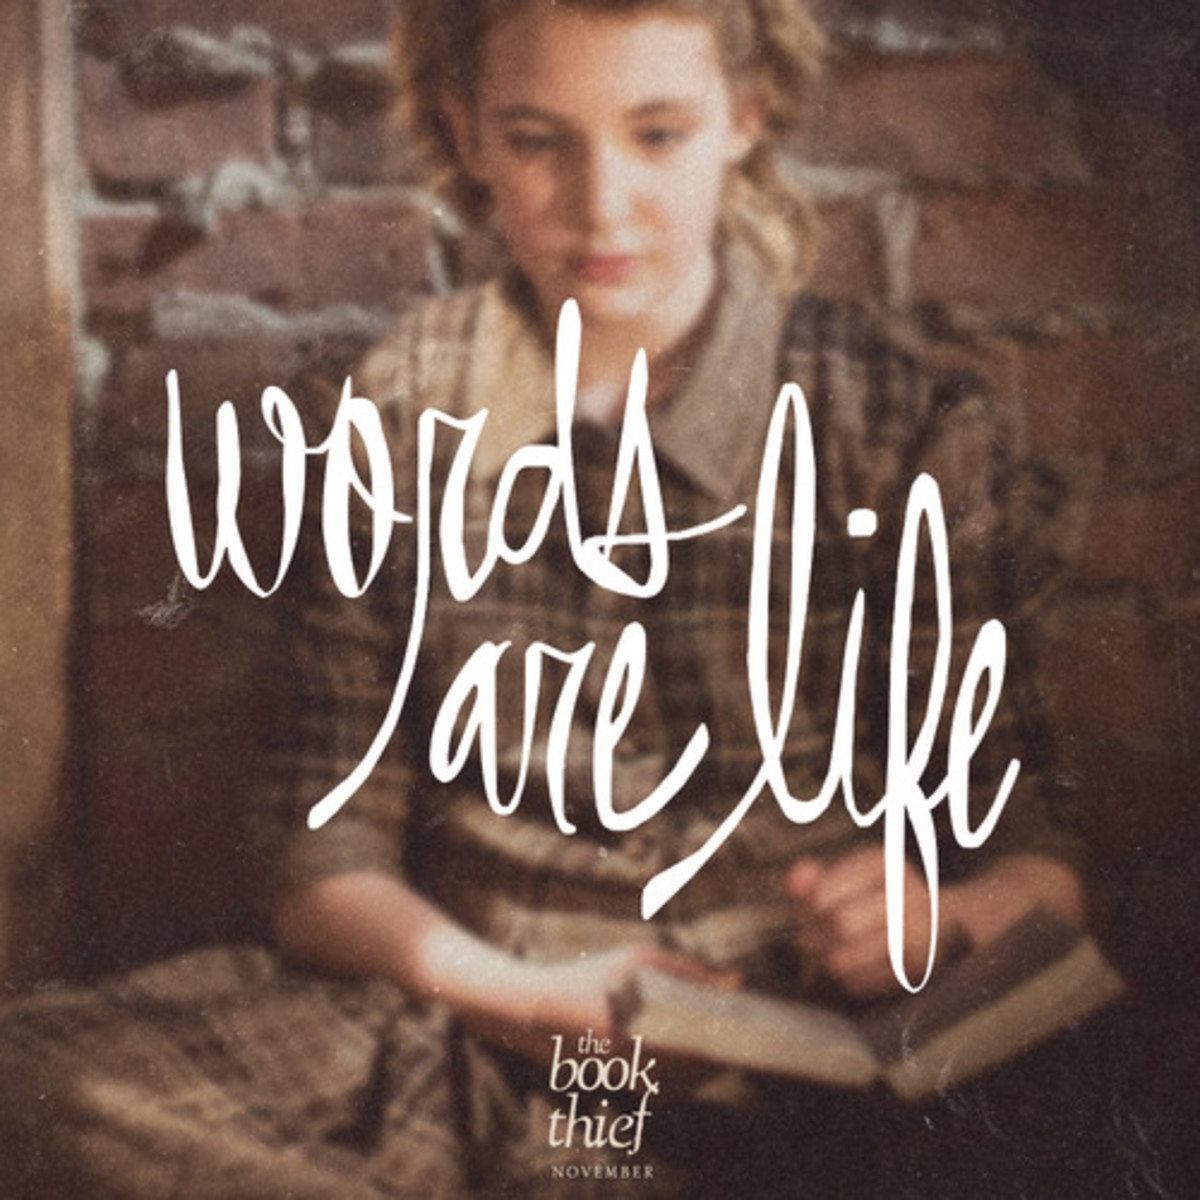 from "The Book Thief"